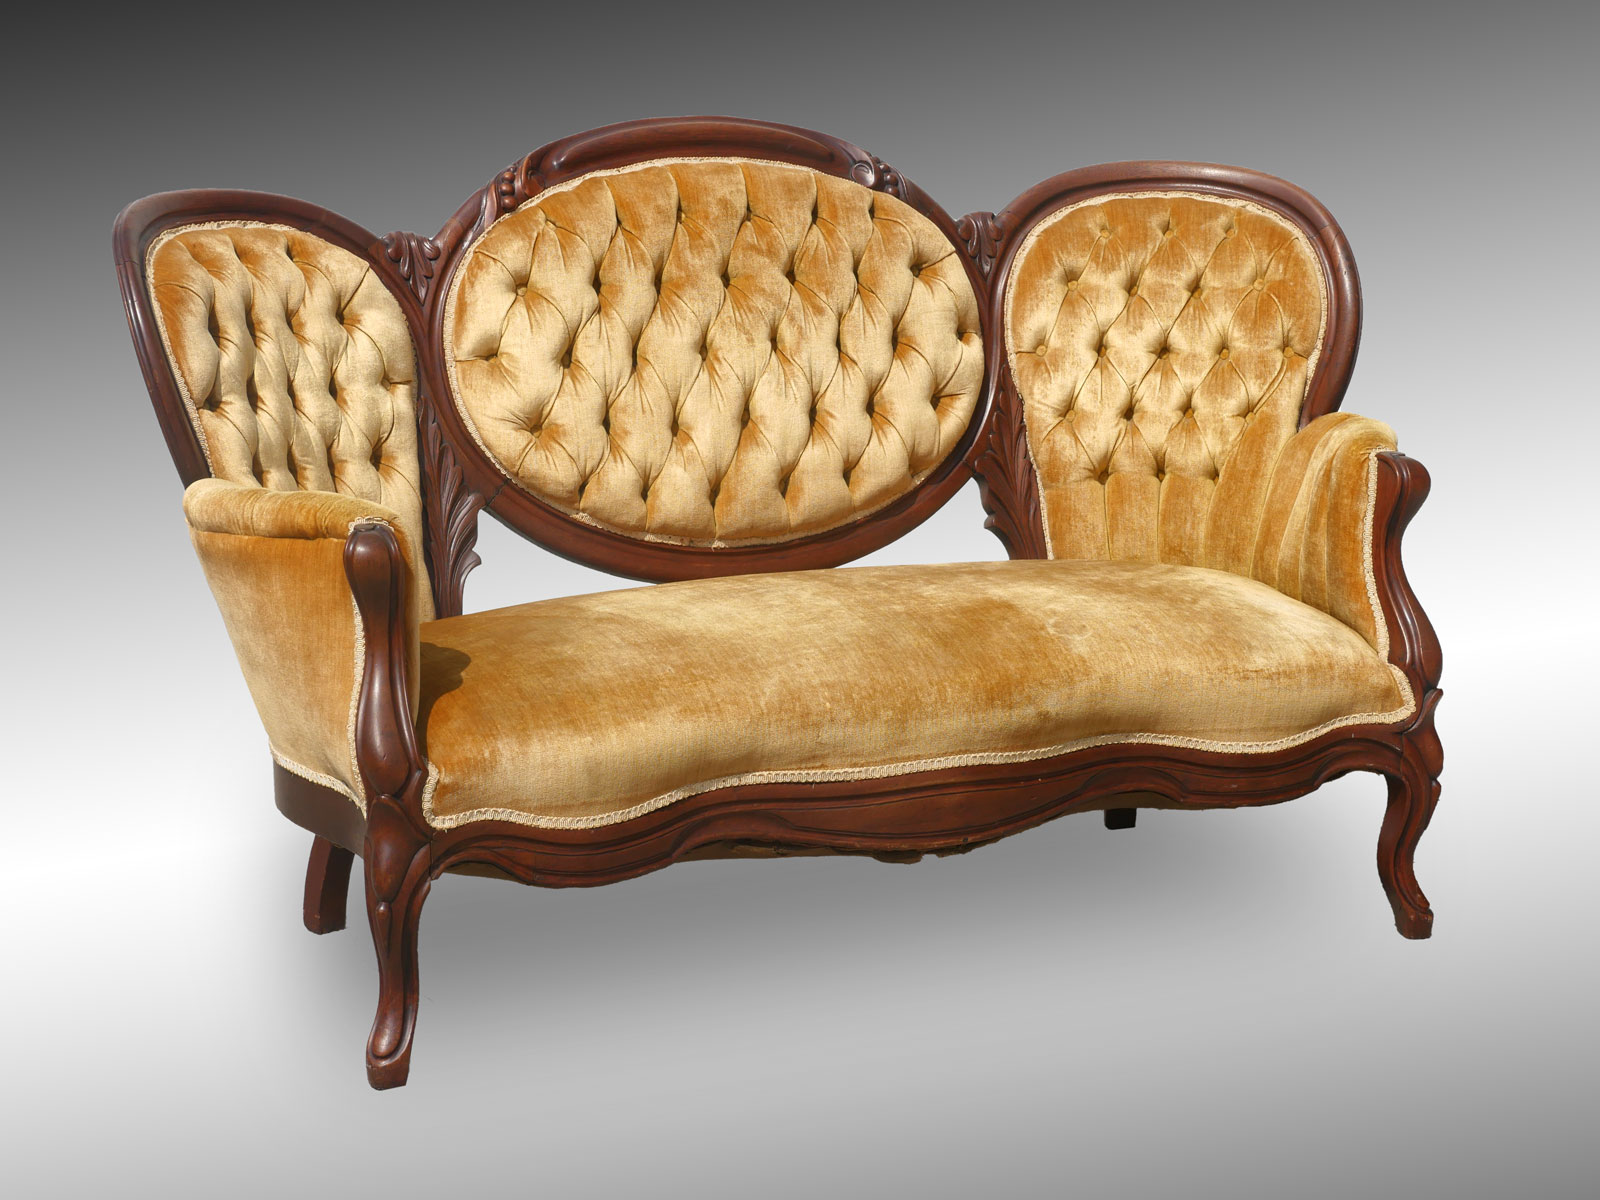 VICTORIAN CAMEO BACK SOFA: Carved